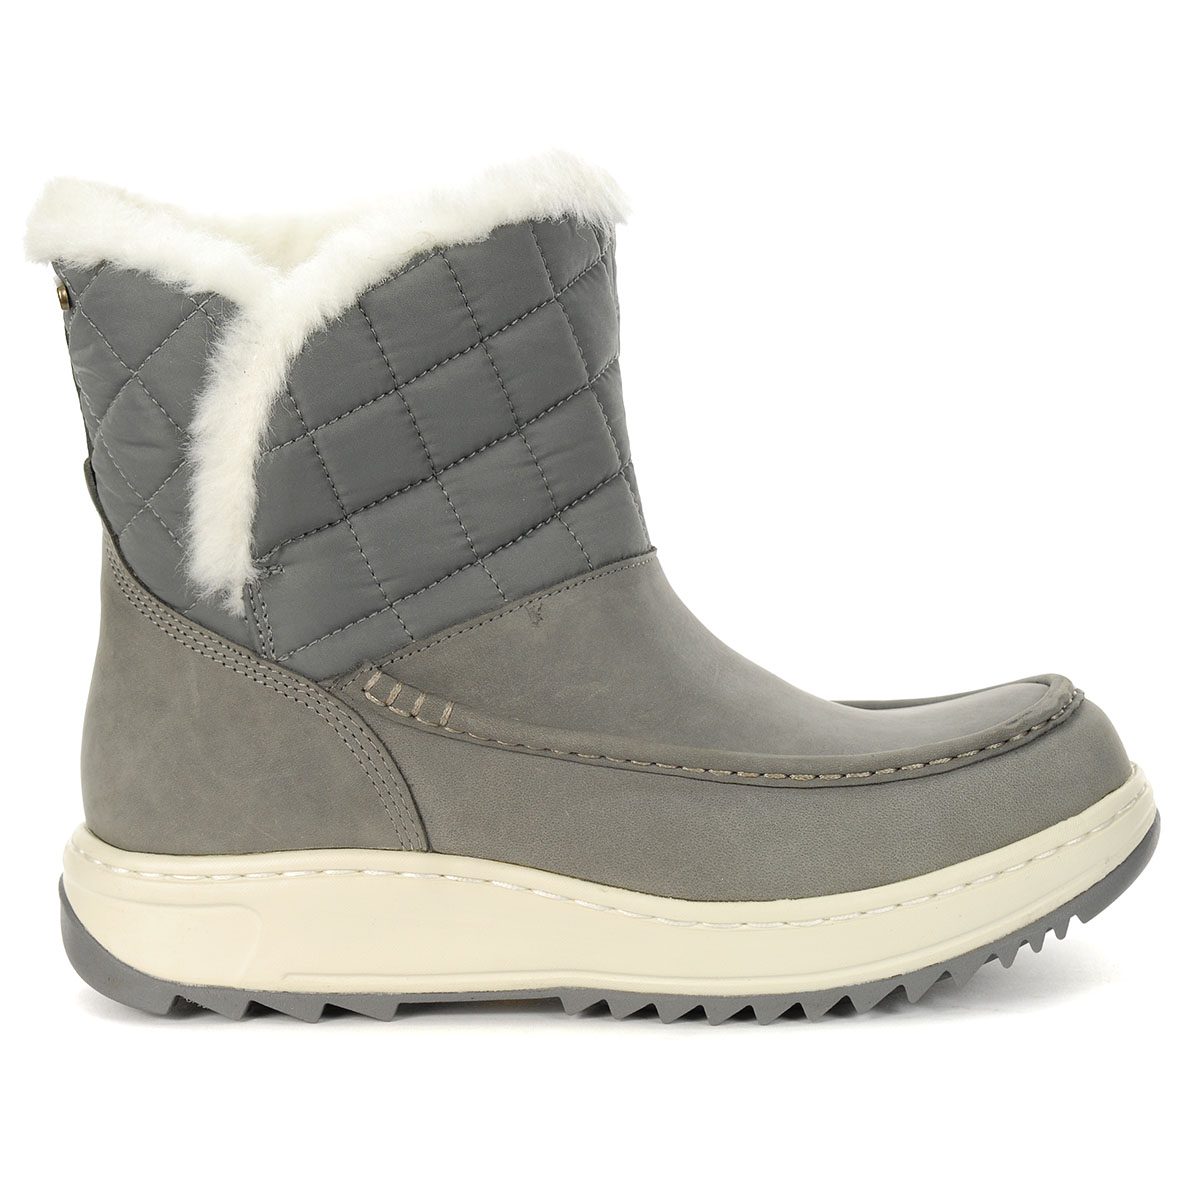 Sperry Top-Sider Women's Powder Altona Quilted Grey Winter Boots STS82674